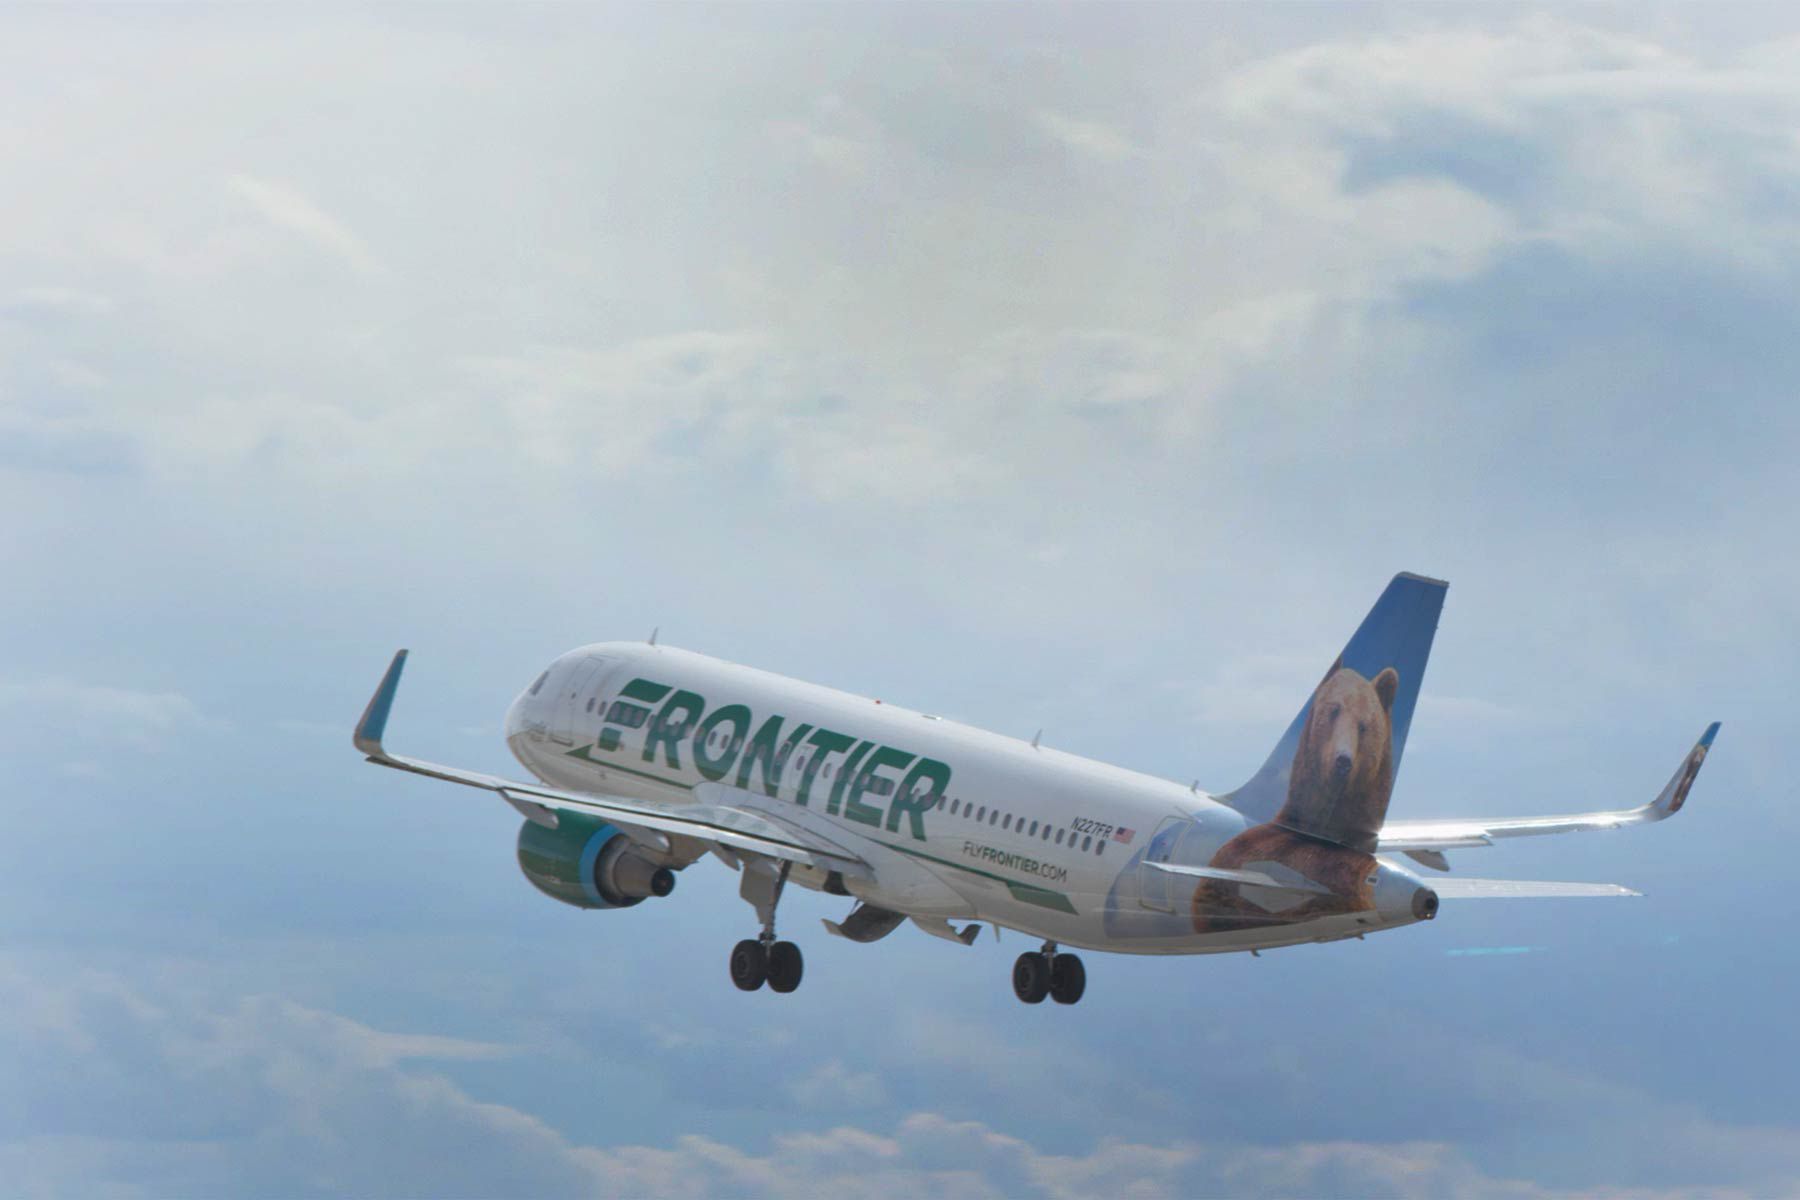 frontier just put 1 million seats on sale — with flights starting at $19